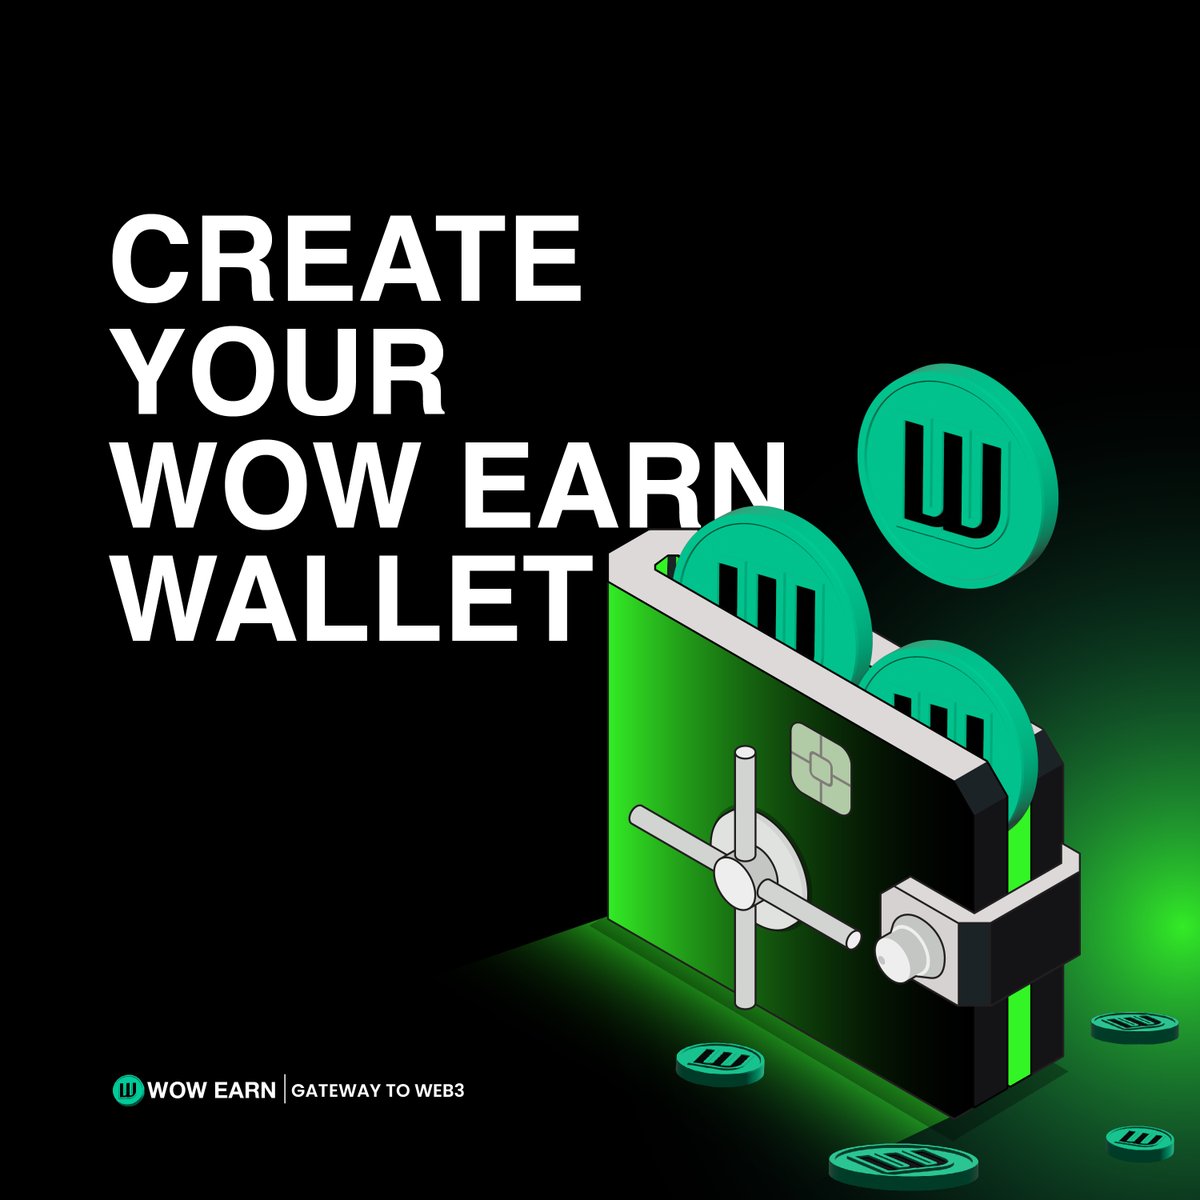 Mastering the art of wallet creation with WOW EARN and take the first step towards financial freedom! #WOWEARN #BacktoBasic